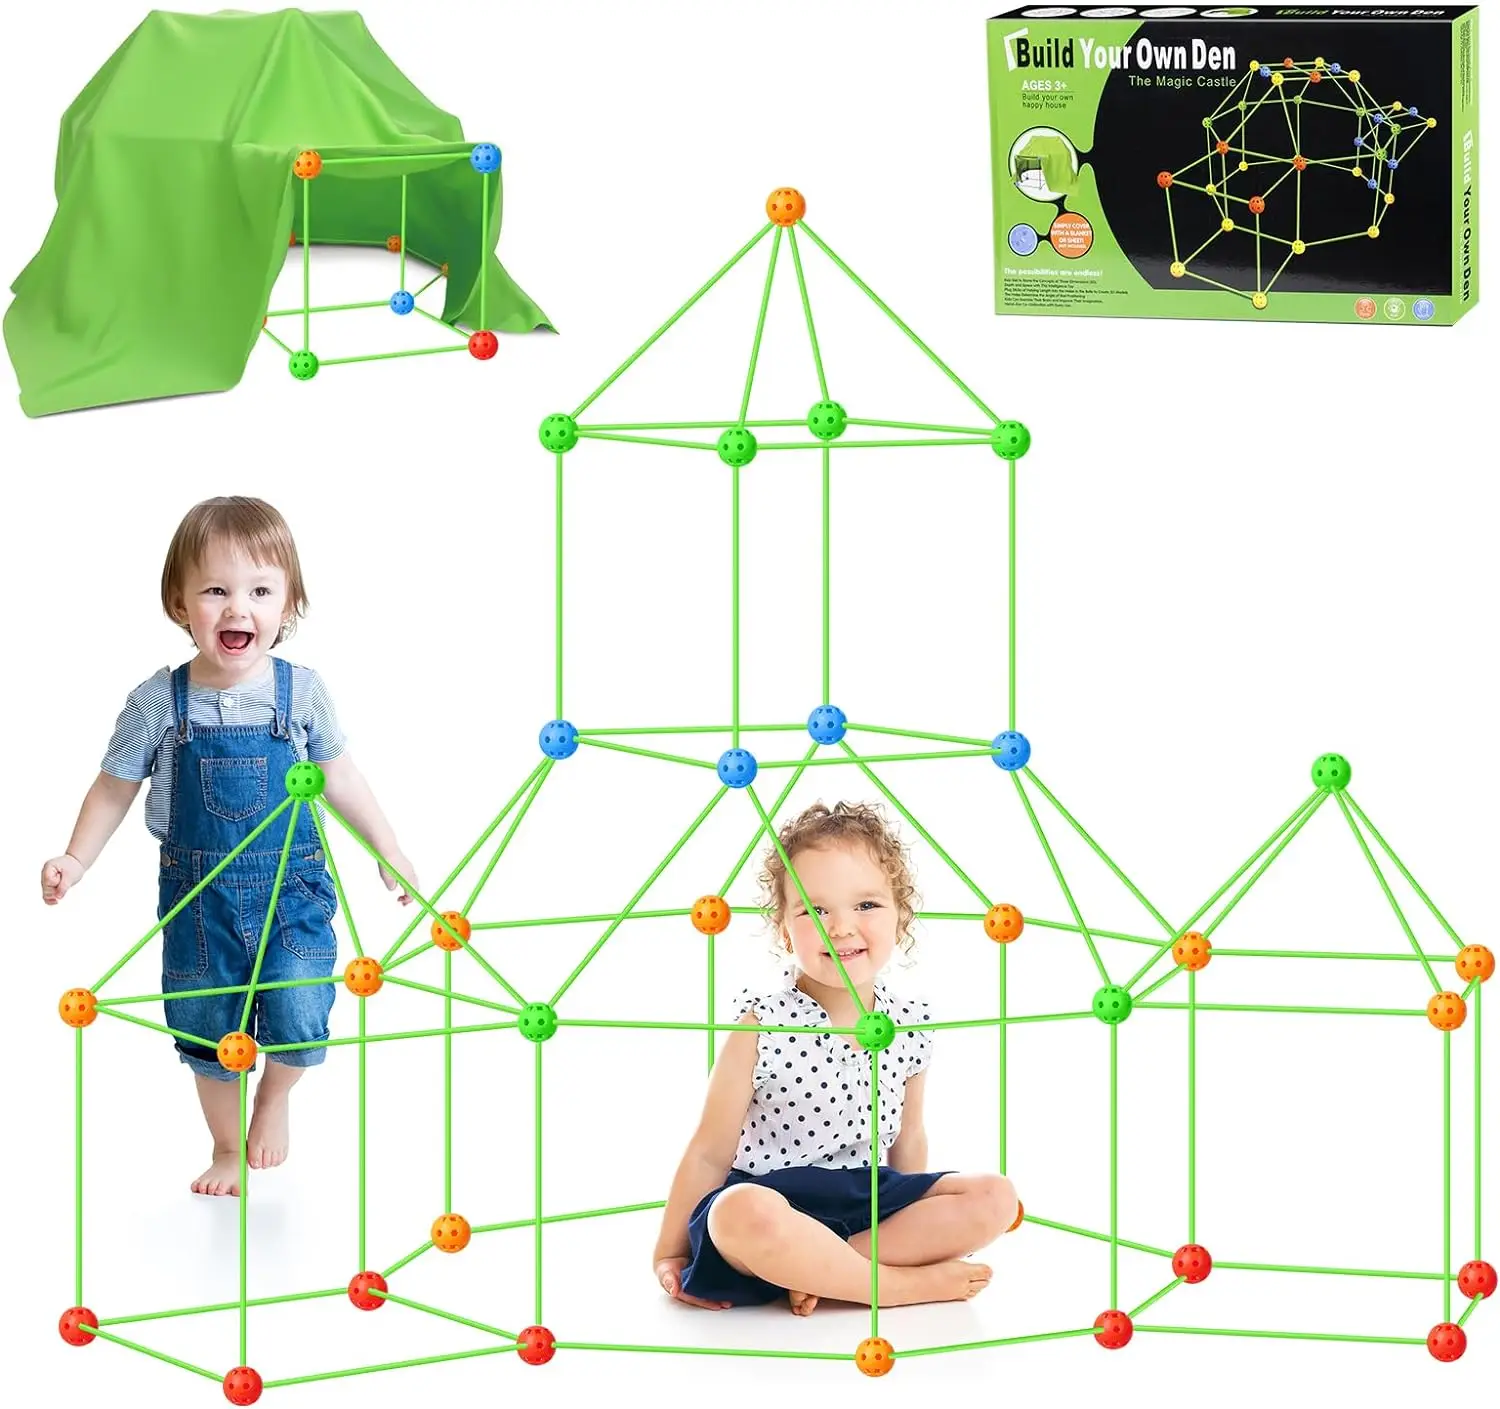 

DIY Fort Construction Creative Toy Fort Building Kit 3D Castles Tunnels Tents Games Educational Play Tent Toys for Kids Gift